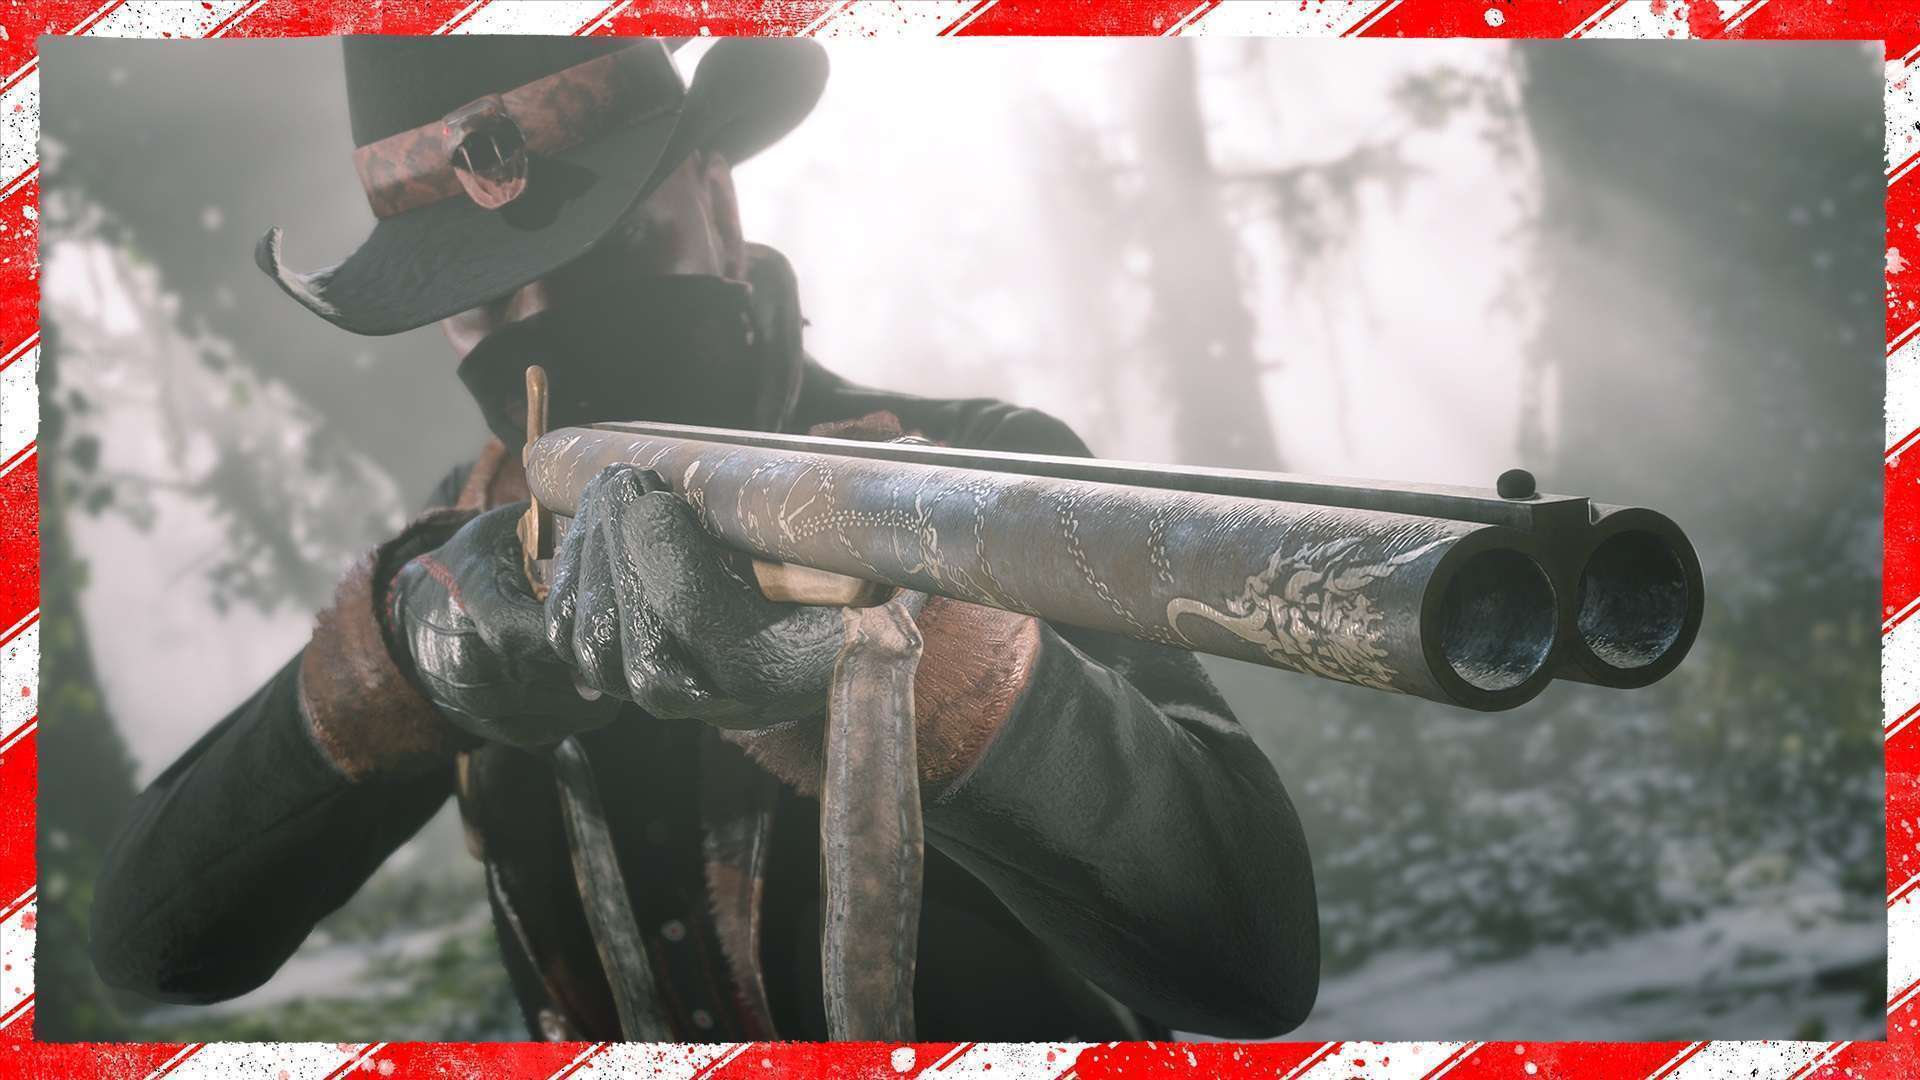 Red Dead Online Celebrates the Holidays with Snowfall, Festive Showdown Modes, Gifts, Decorations, Bonuses, Discounts, and More 